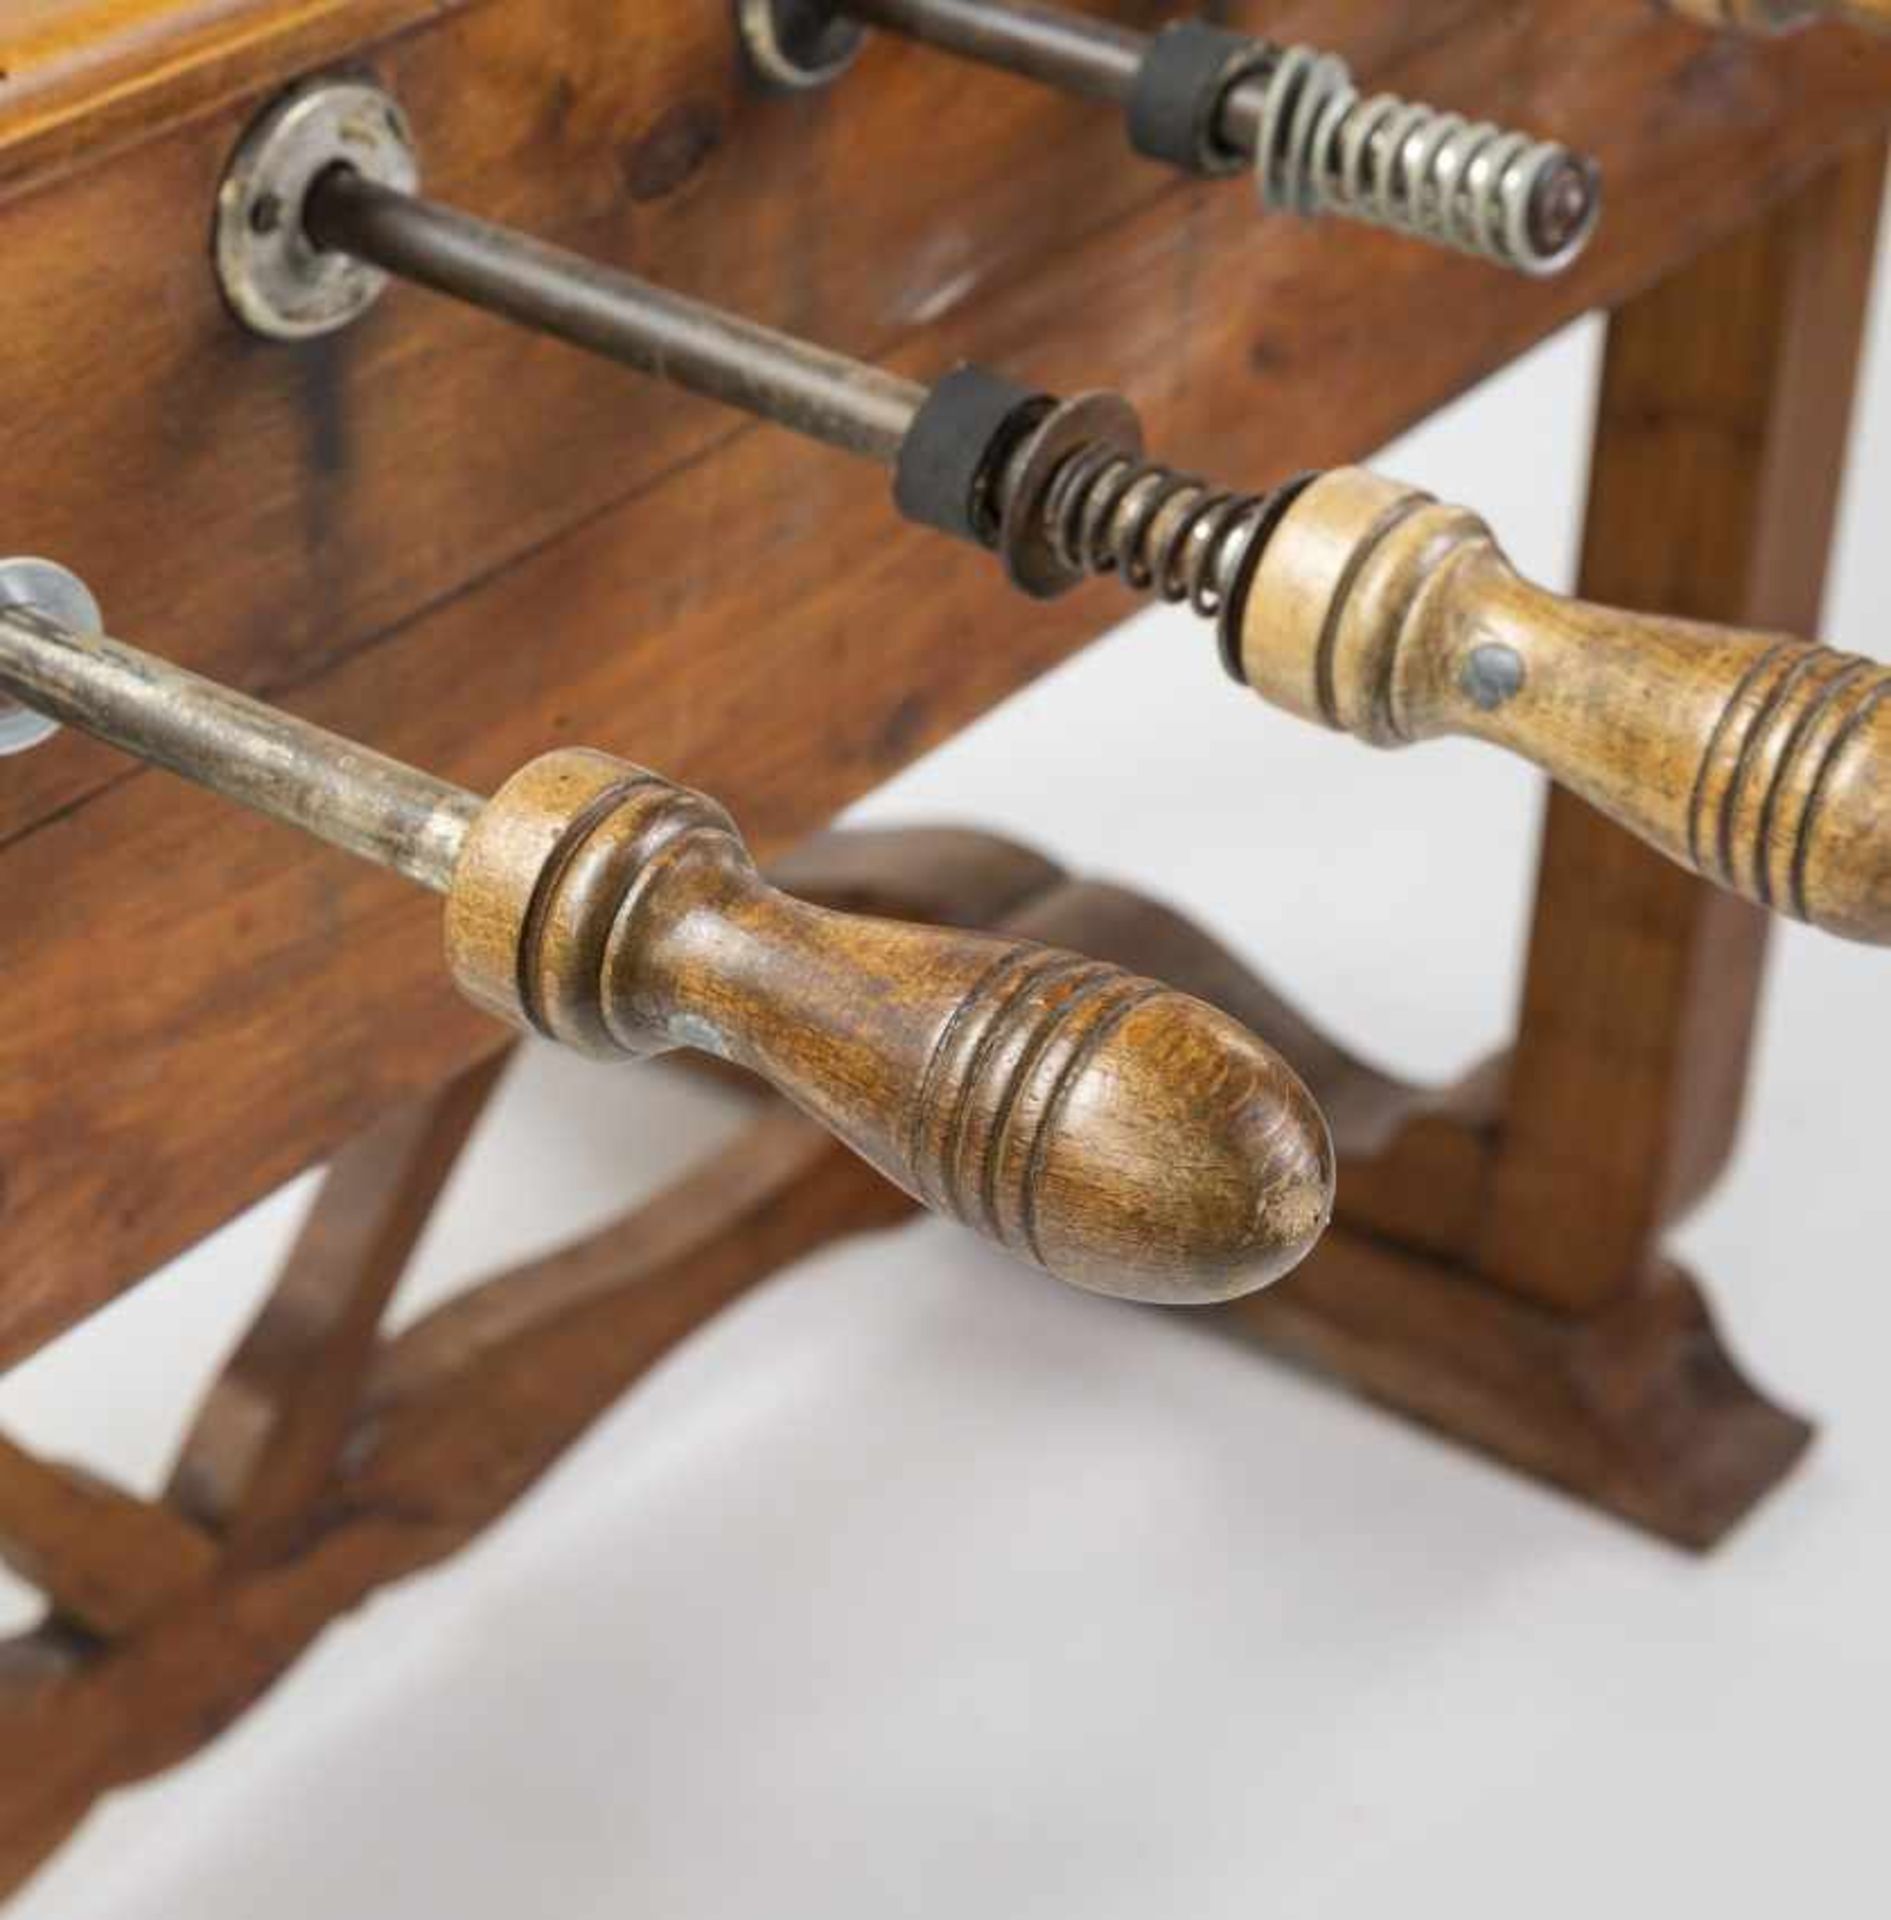 Spanish table football in wood and metal, circa 1940-1950Spanish table football in wood and metal, - Bild 4 aus 7